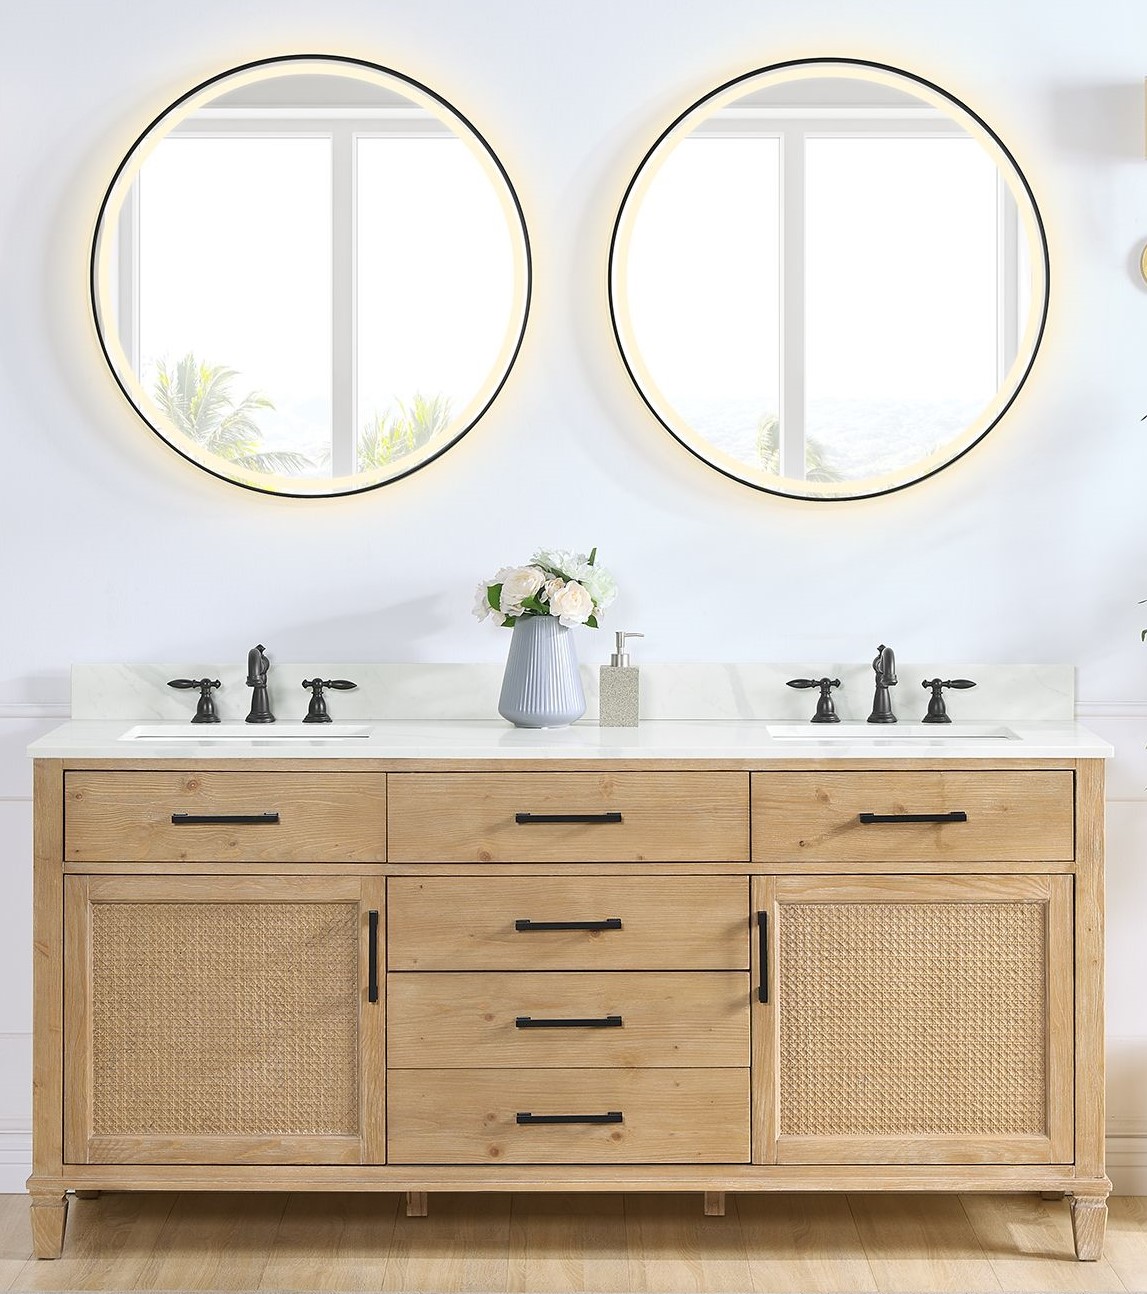 Issac Edwards 72" Double Bathroom Vanity in Weathered Fir with Calacatta White Quartz Stone Countertop with Mirror